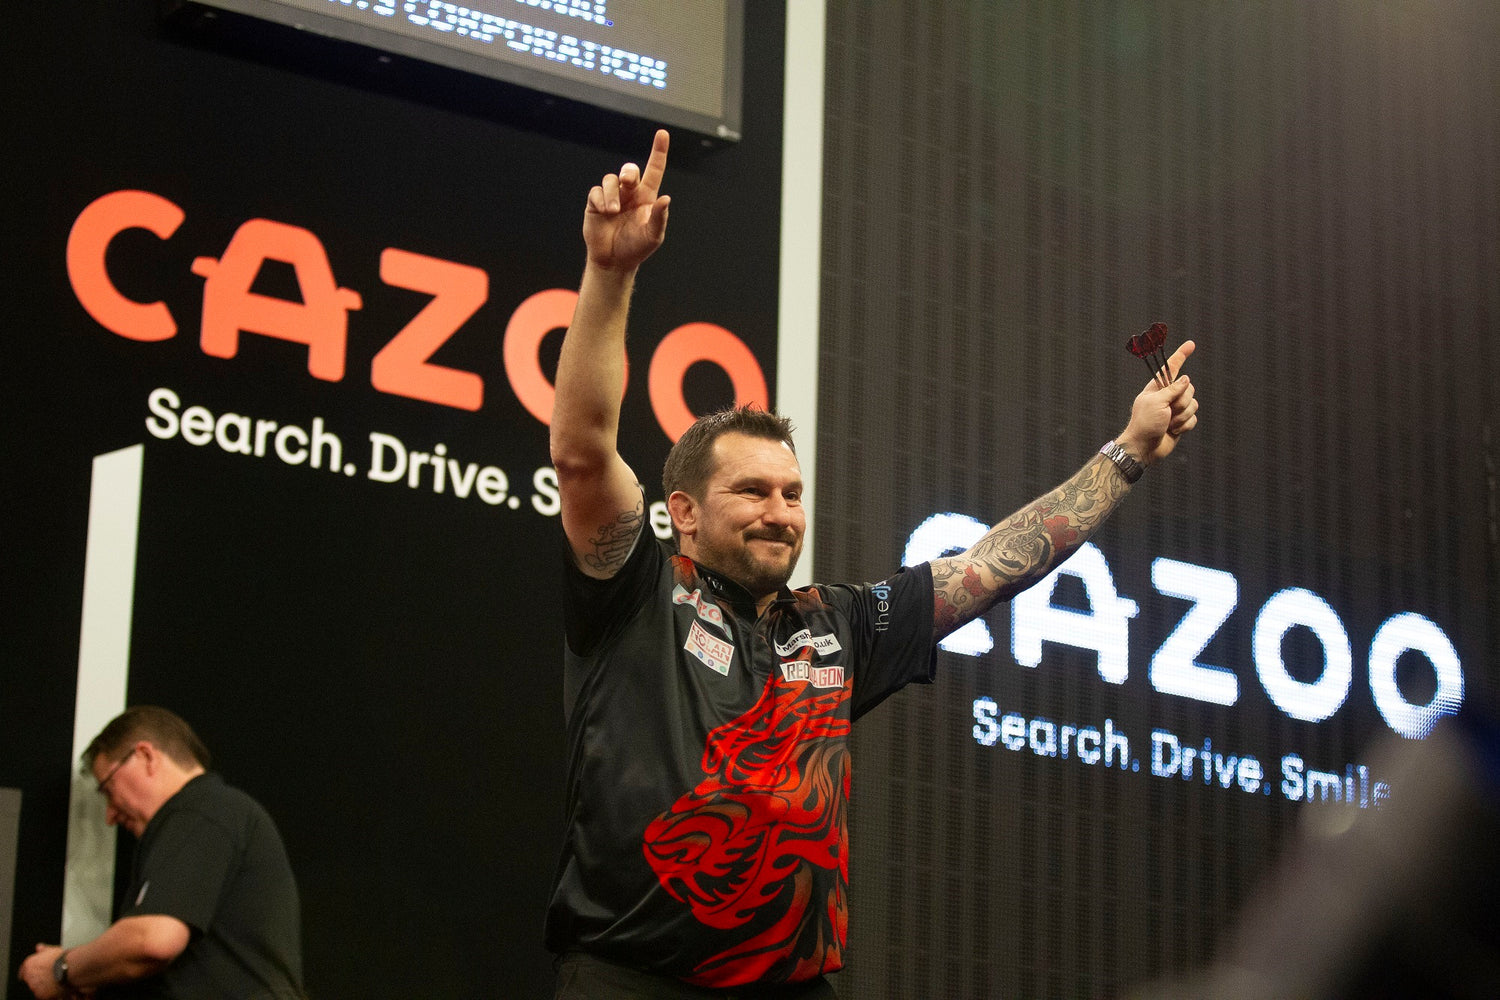 Clayton reigns supreme in Liverpool on Cazoo Premier League Night 2